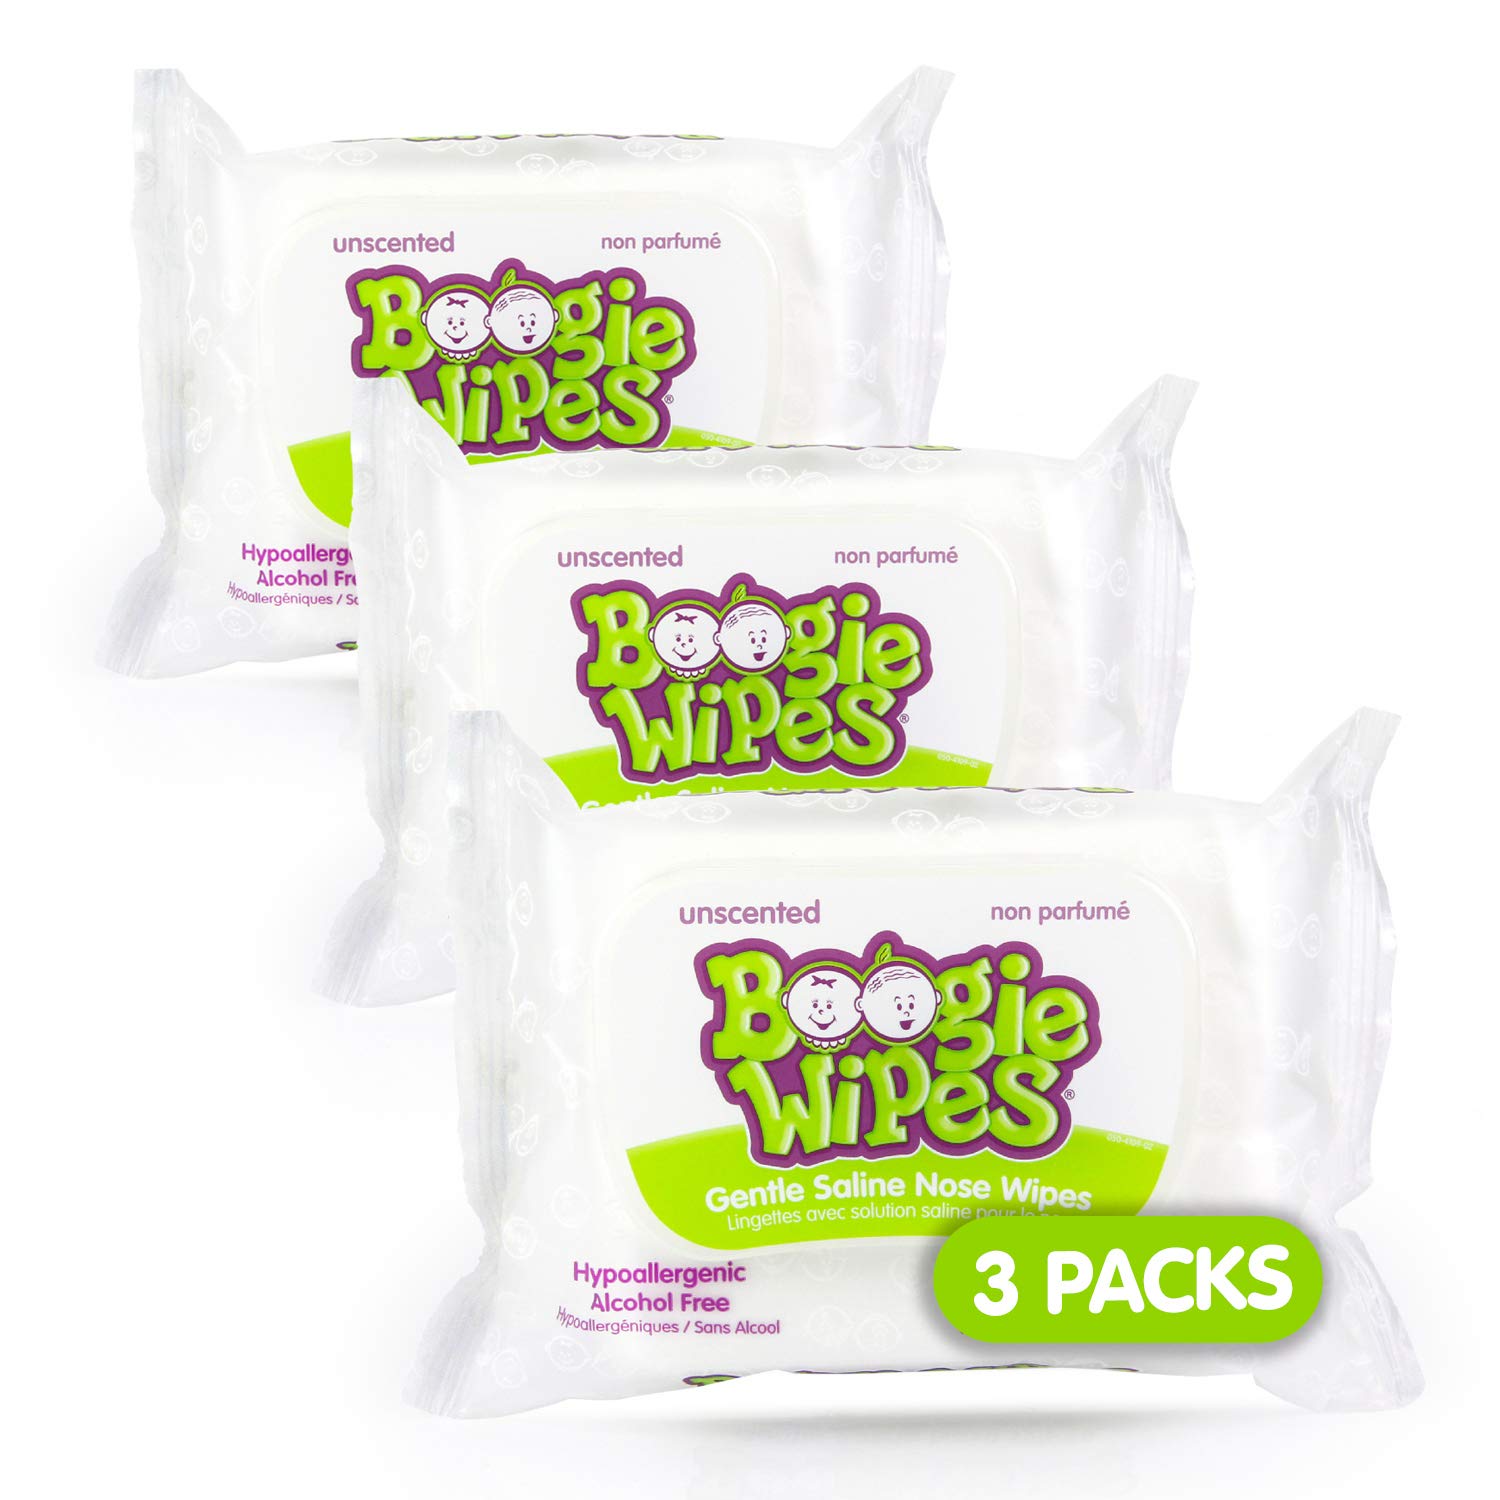 Eleeo Brands Hand, Face and Nose Wet Boogie Wipes for Kids & Baby, Alcohol Free, Wipes Away Dirt & Germs, Soft Natural Saline Tissue with Aloe, Chamomile and Vitamin E, Unscented, 30 Count (Pack of 3)